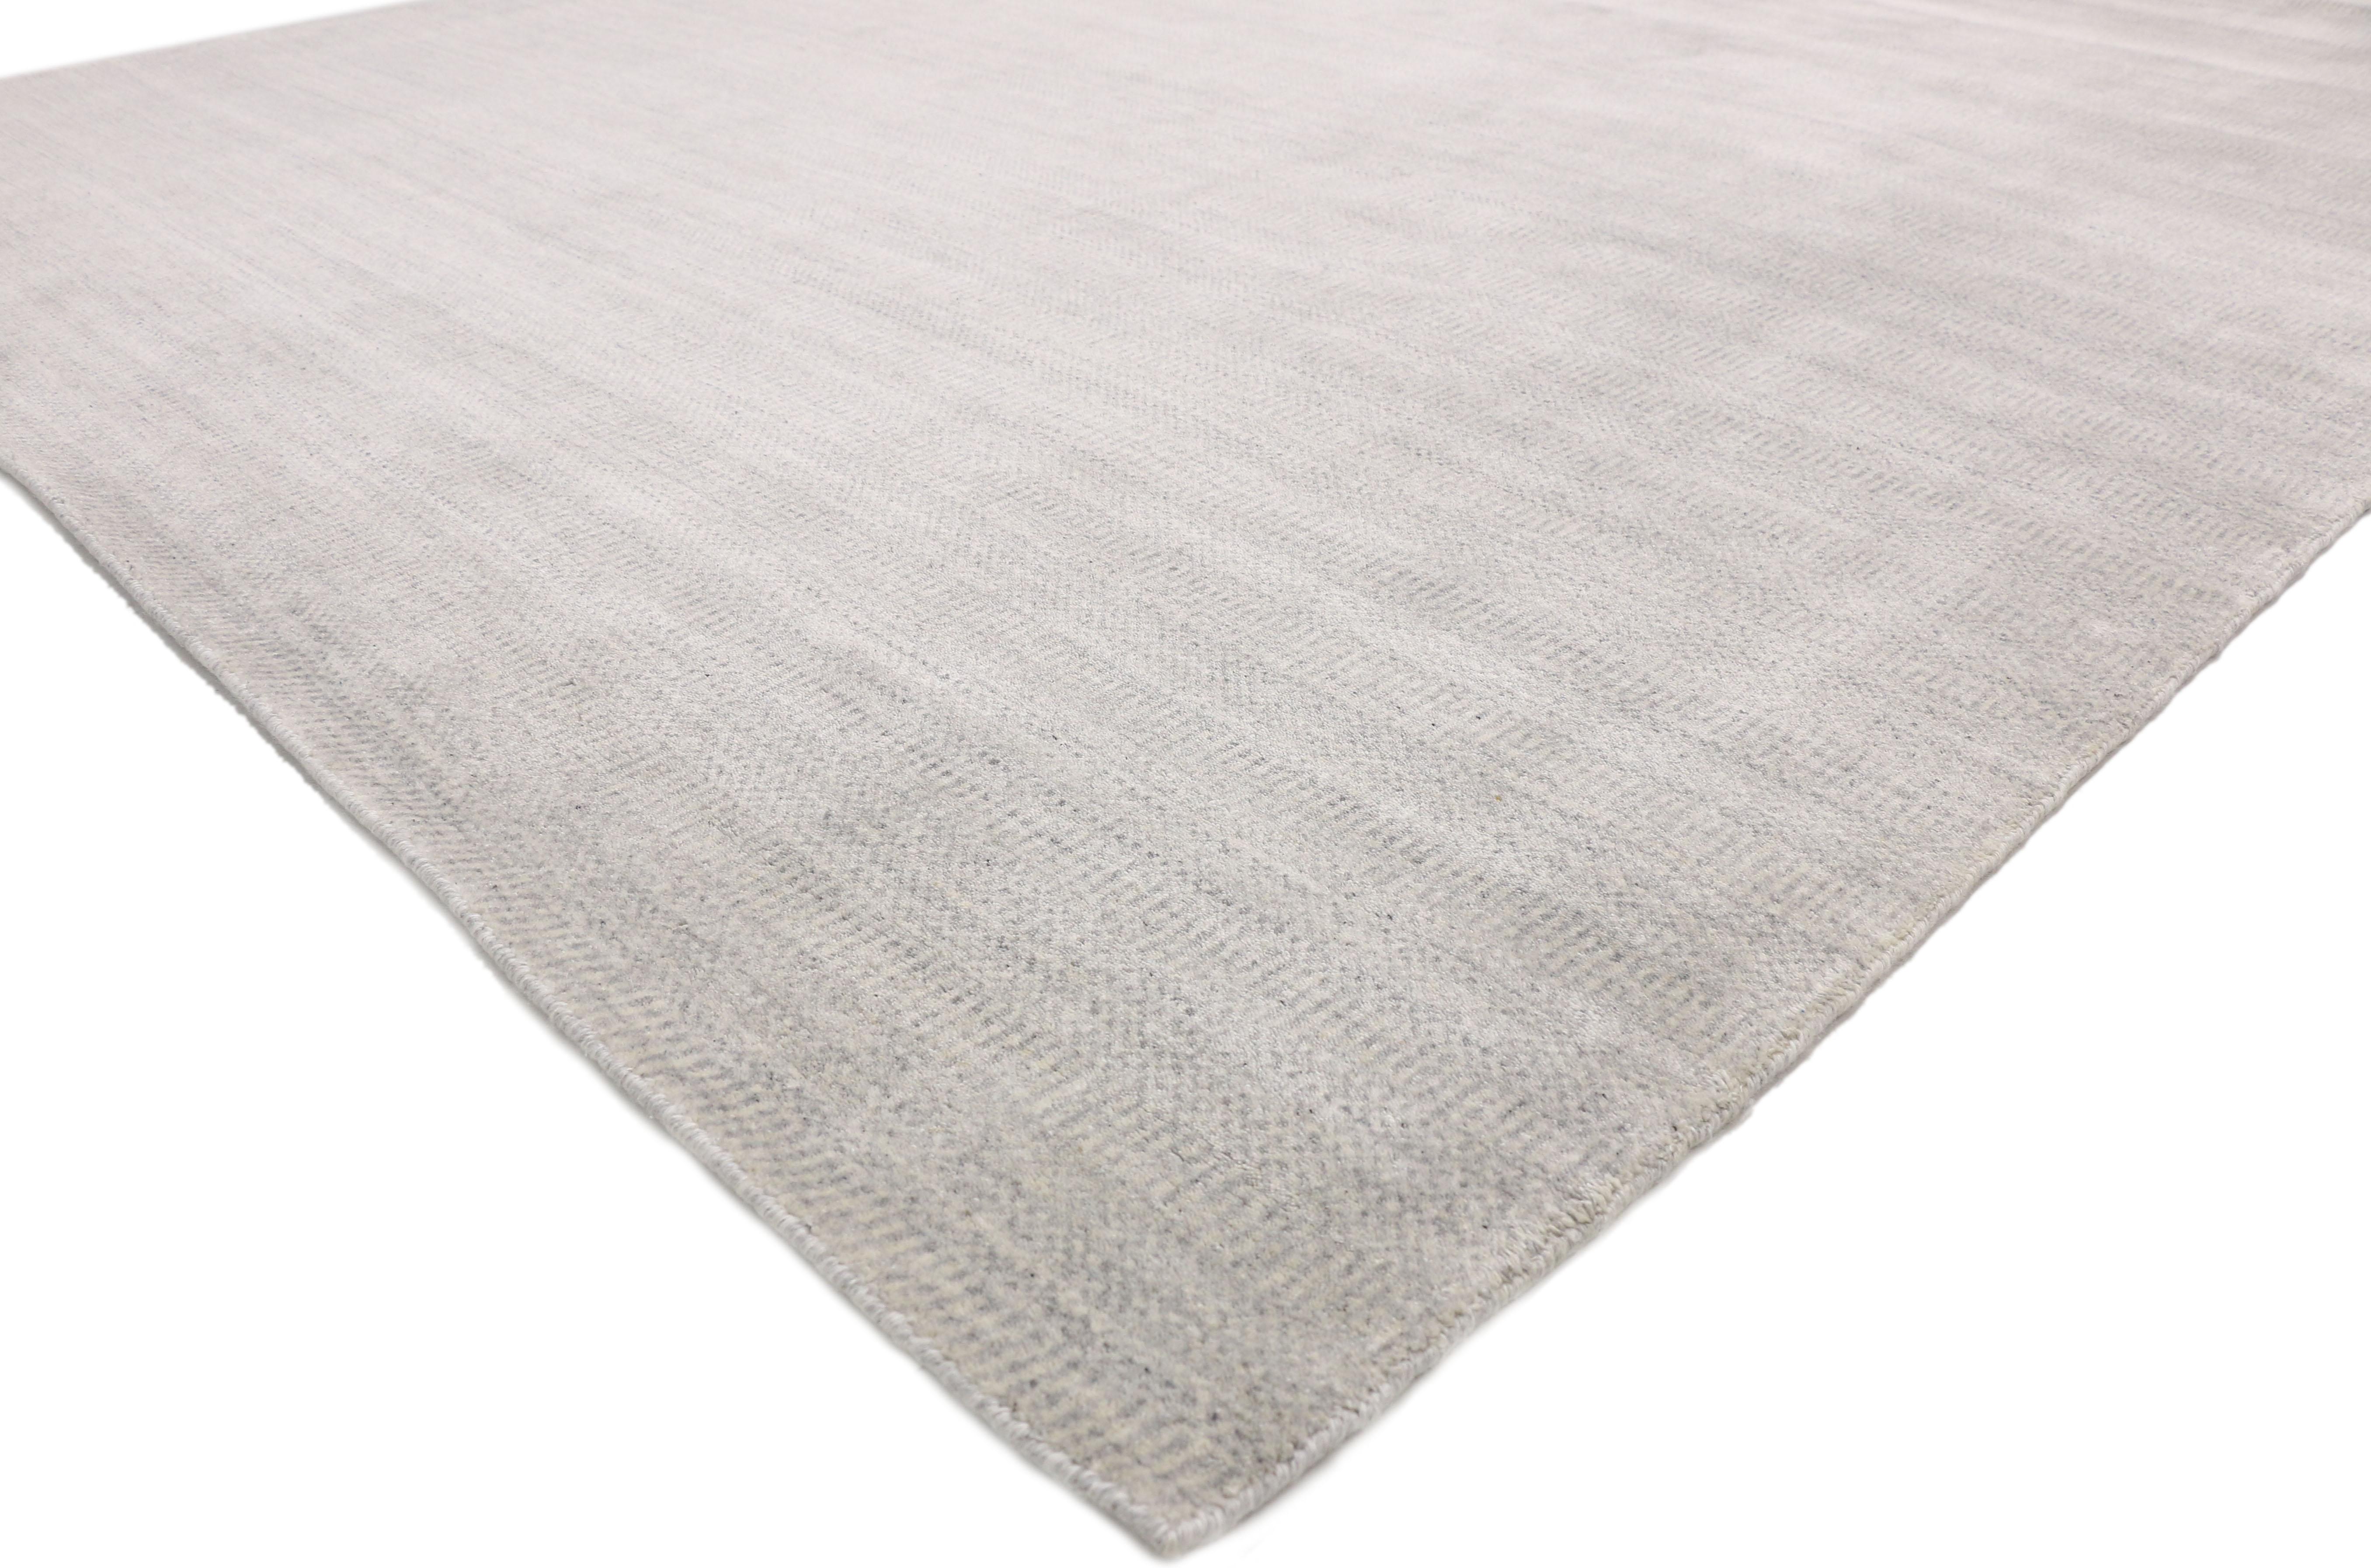 30431, new transitional light gray area rug with Scandinavian modern Nordic style. Effortlessly chic and tastefully understated this new modern light gray area rug with Nordic style embodies wool's natural beauty and the elegance of a pale